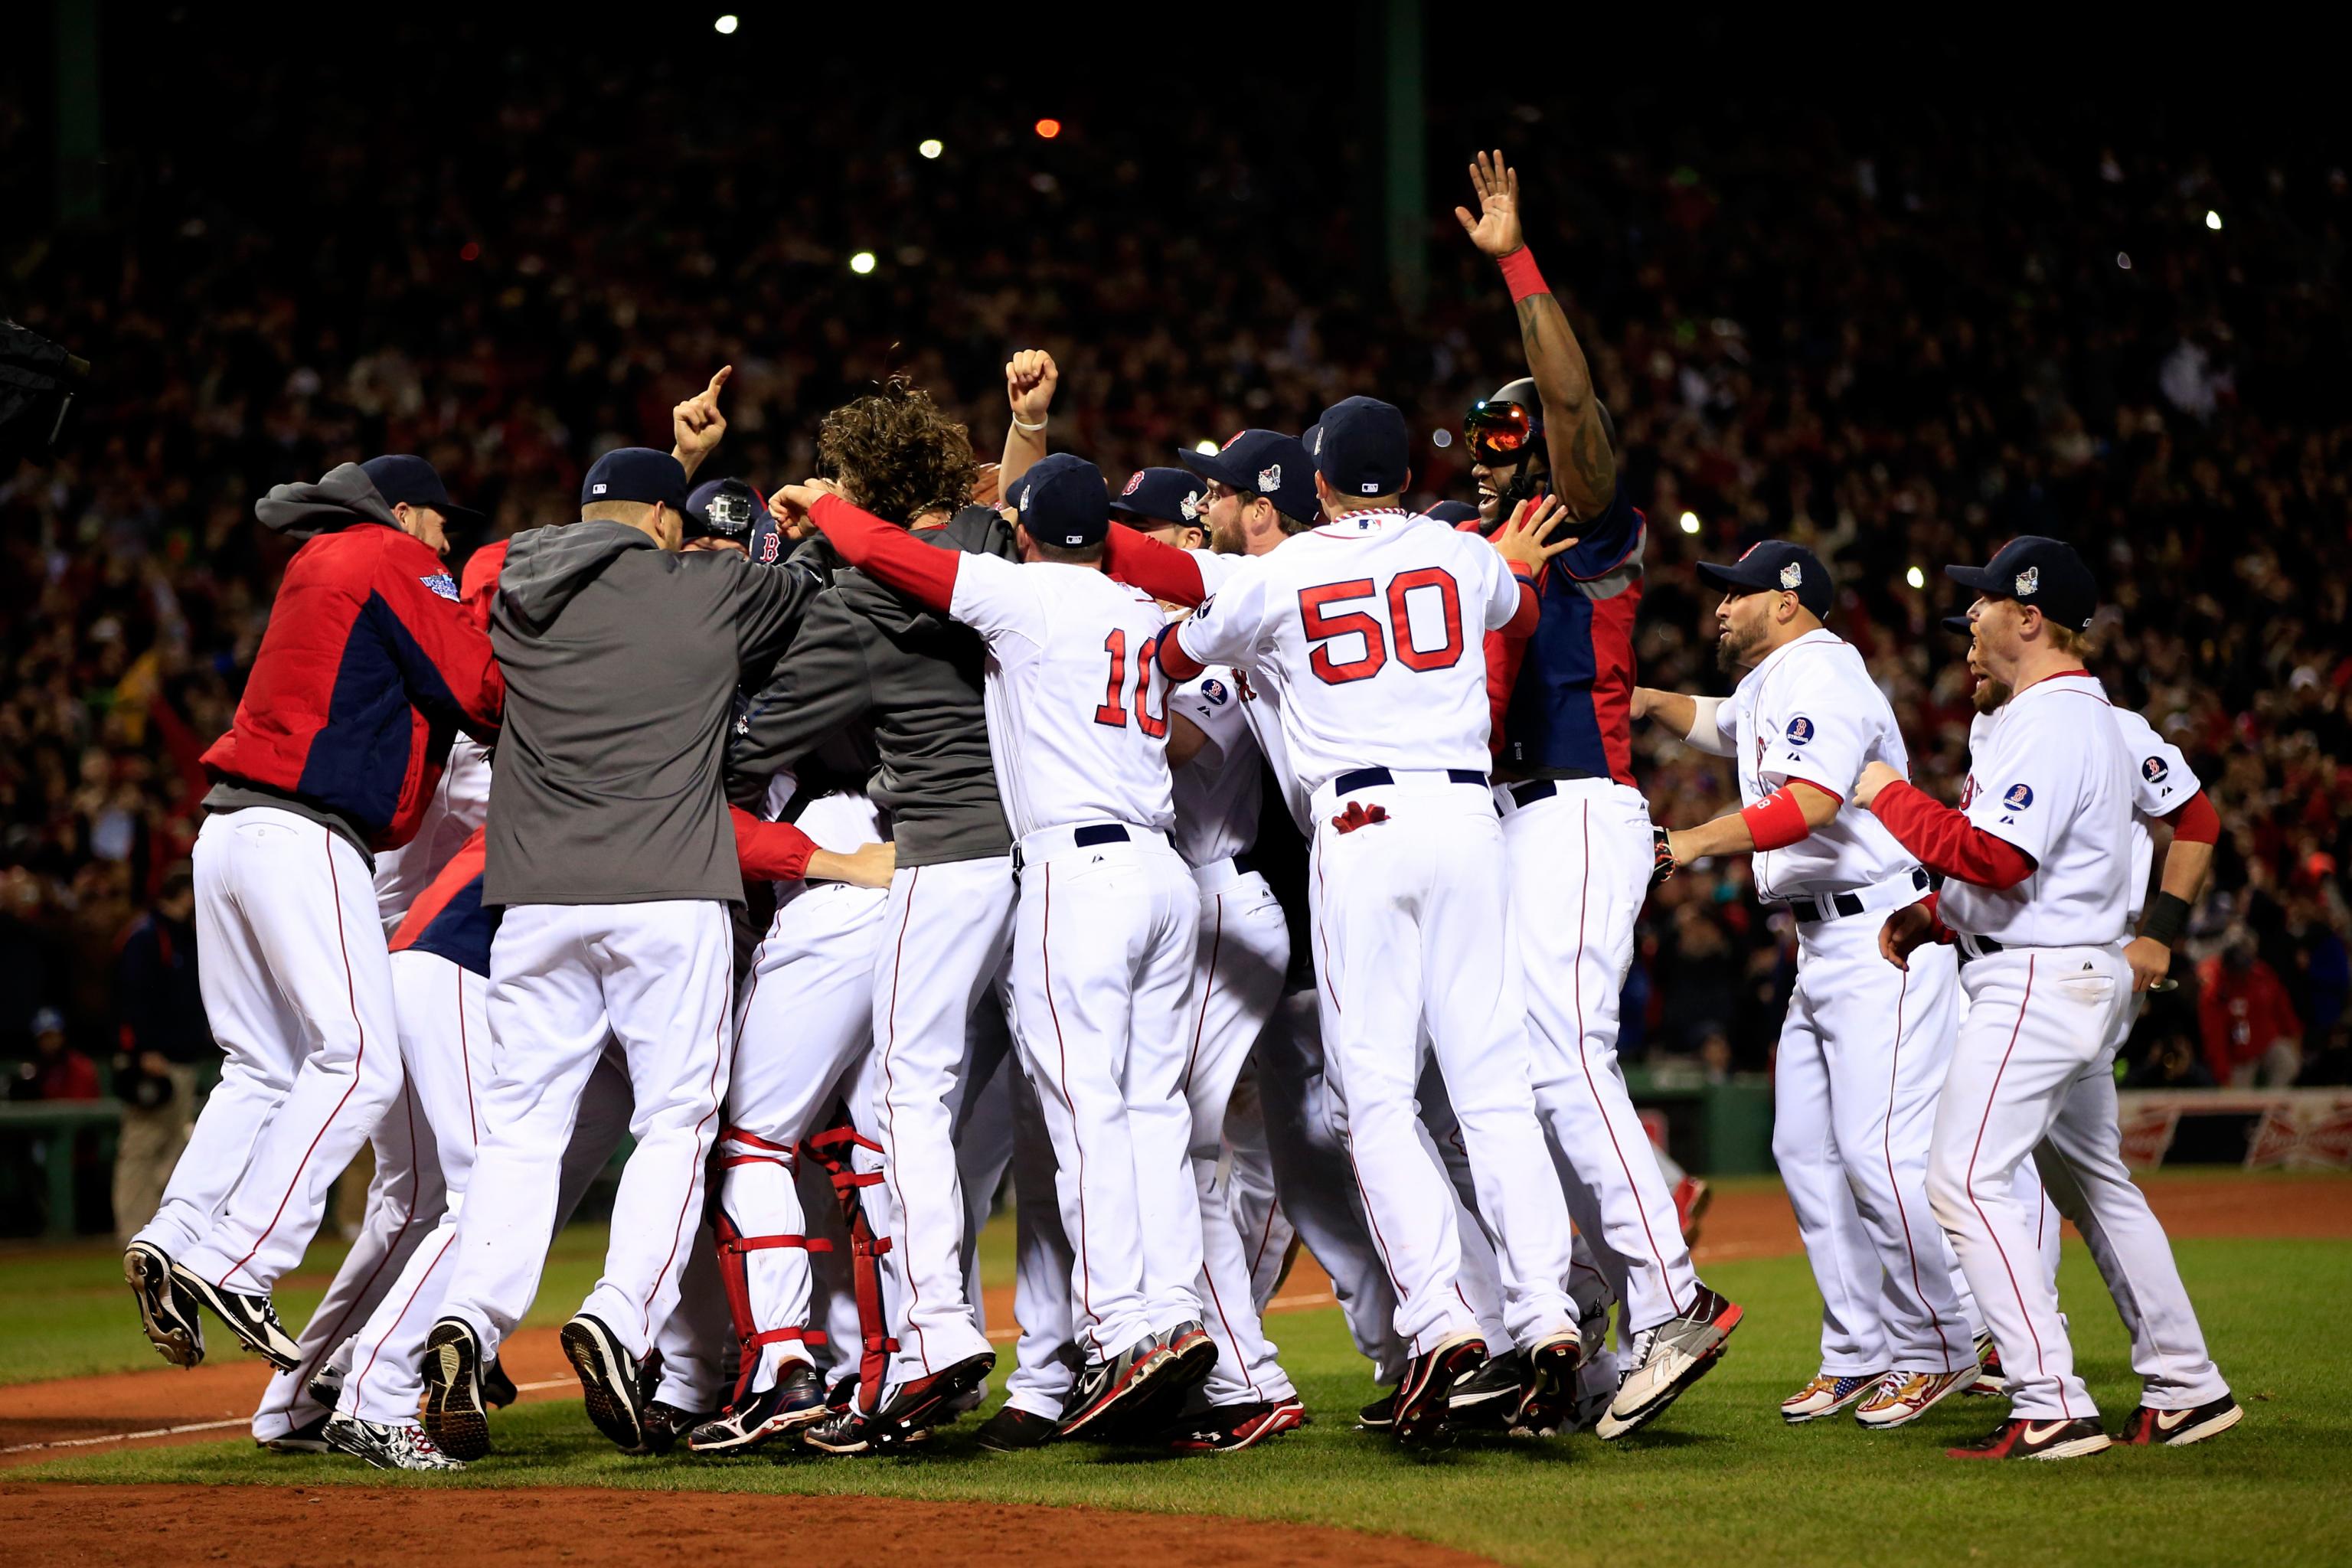 Boston Red Sox Memories: The unsung heroes of the 2013 World Series